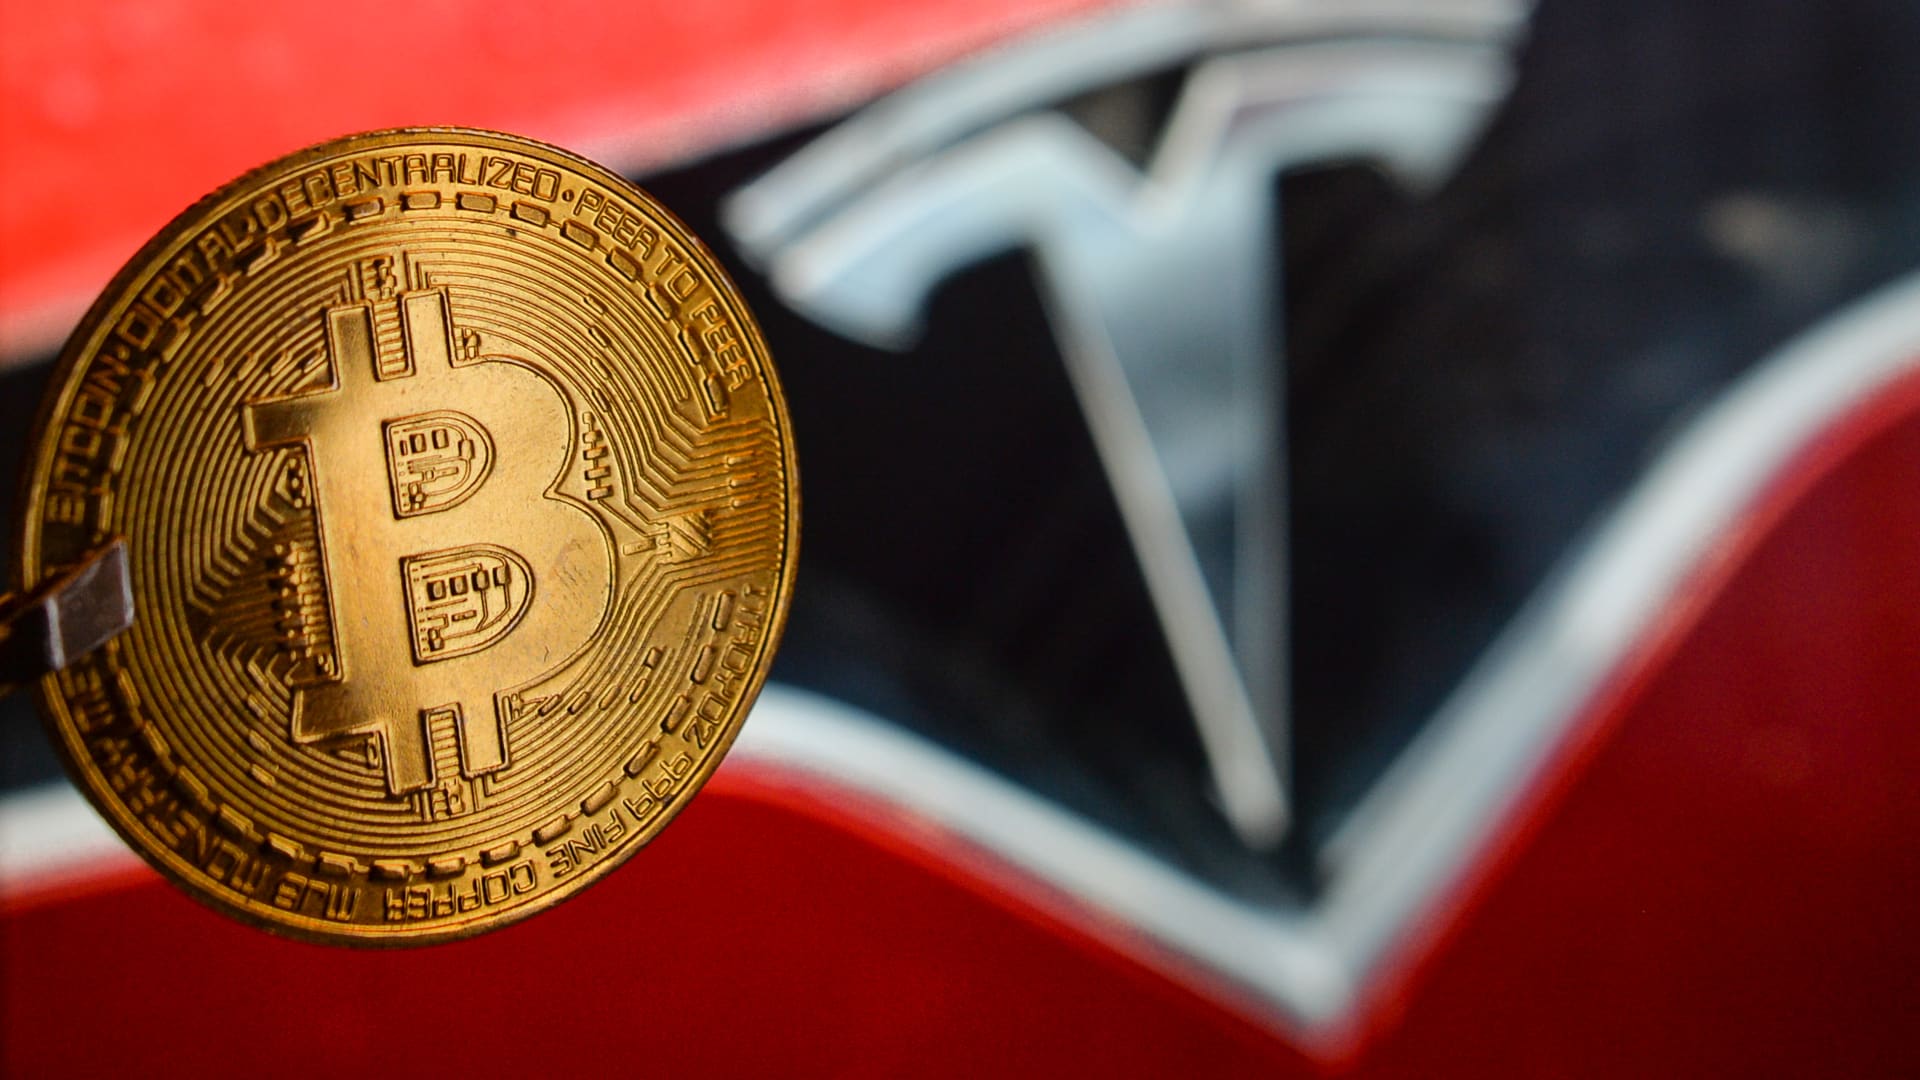 Tesla has made about $1 billion in profit on its bitcoin investment, analyst estimates